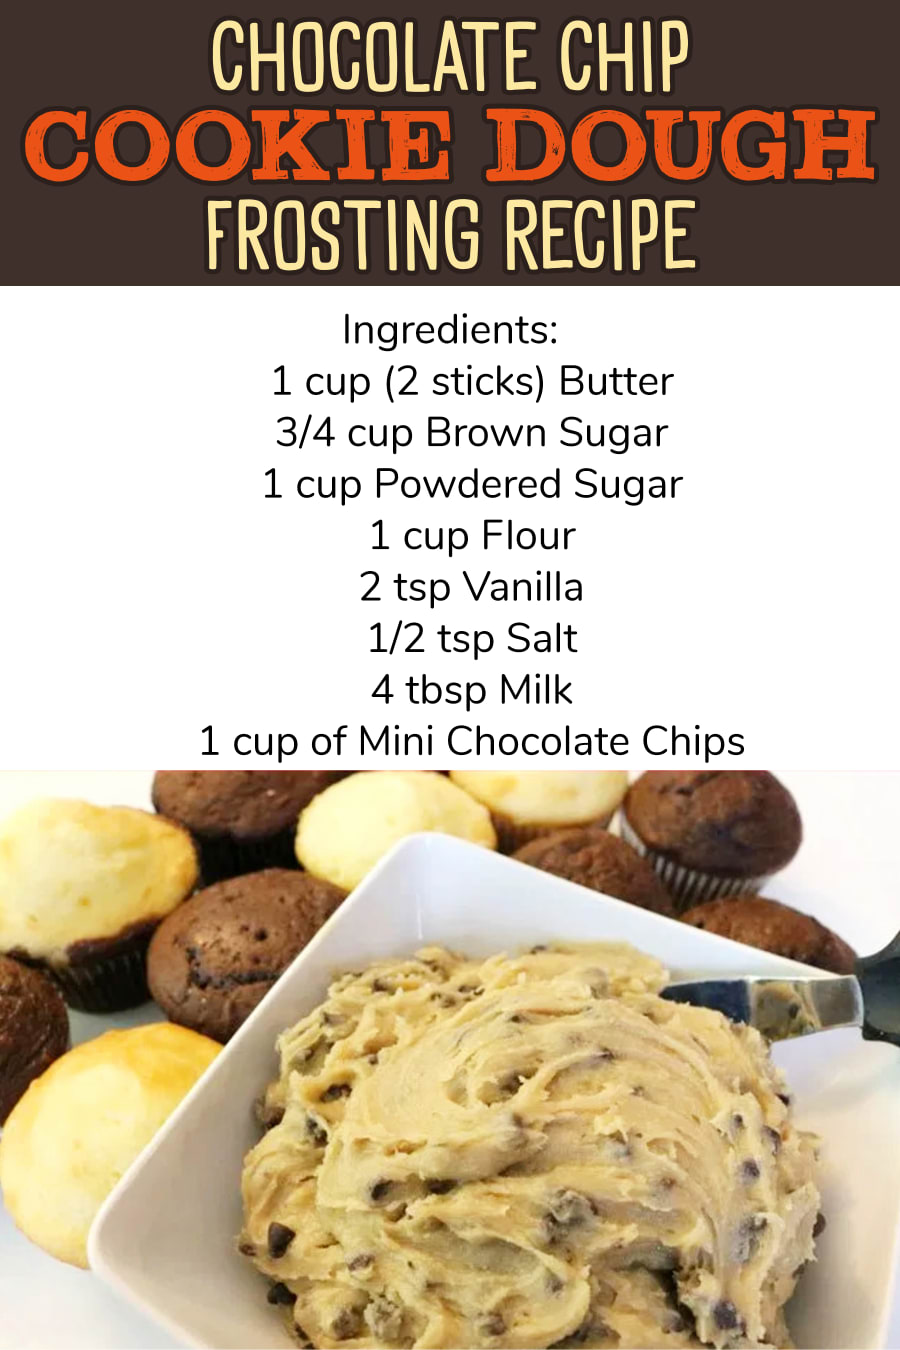 Chocolate chip cookie dough frosting recipe for cakes, cupcakes, brownies and sweet treats for a crowd (gluten free frosting recipe alternative too).  Easy homemade frosting recipes - cookie dough icing, chocolate chip frosting - recipes to try - easy desserts for a crowd - birthday cake ideas for chocolate lovers